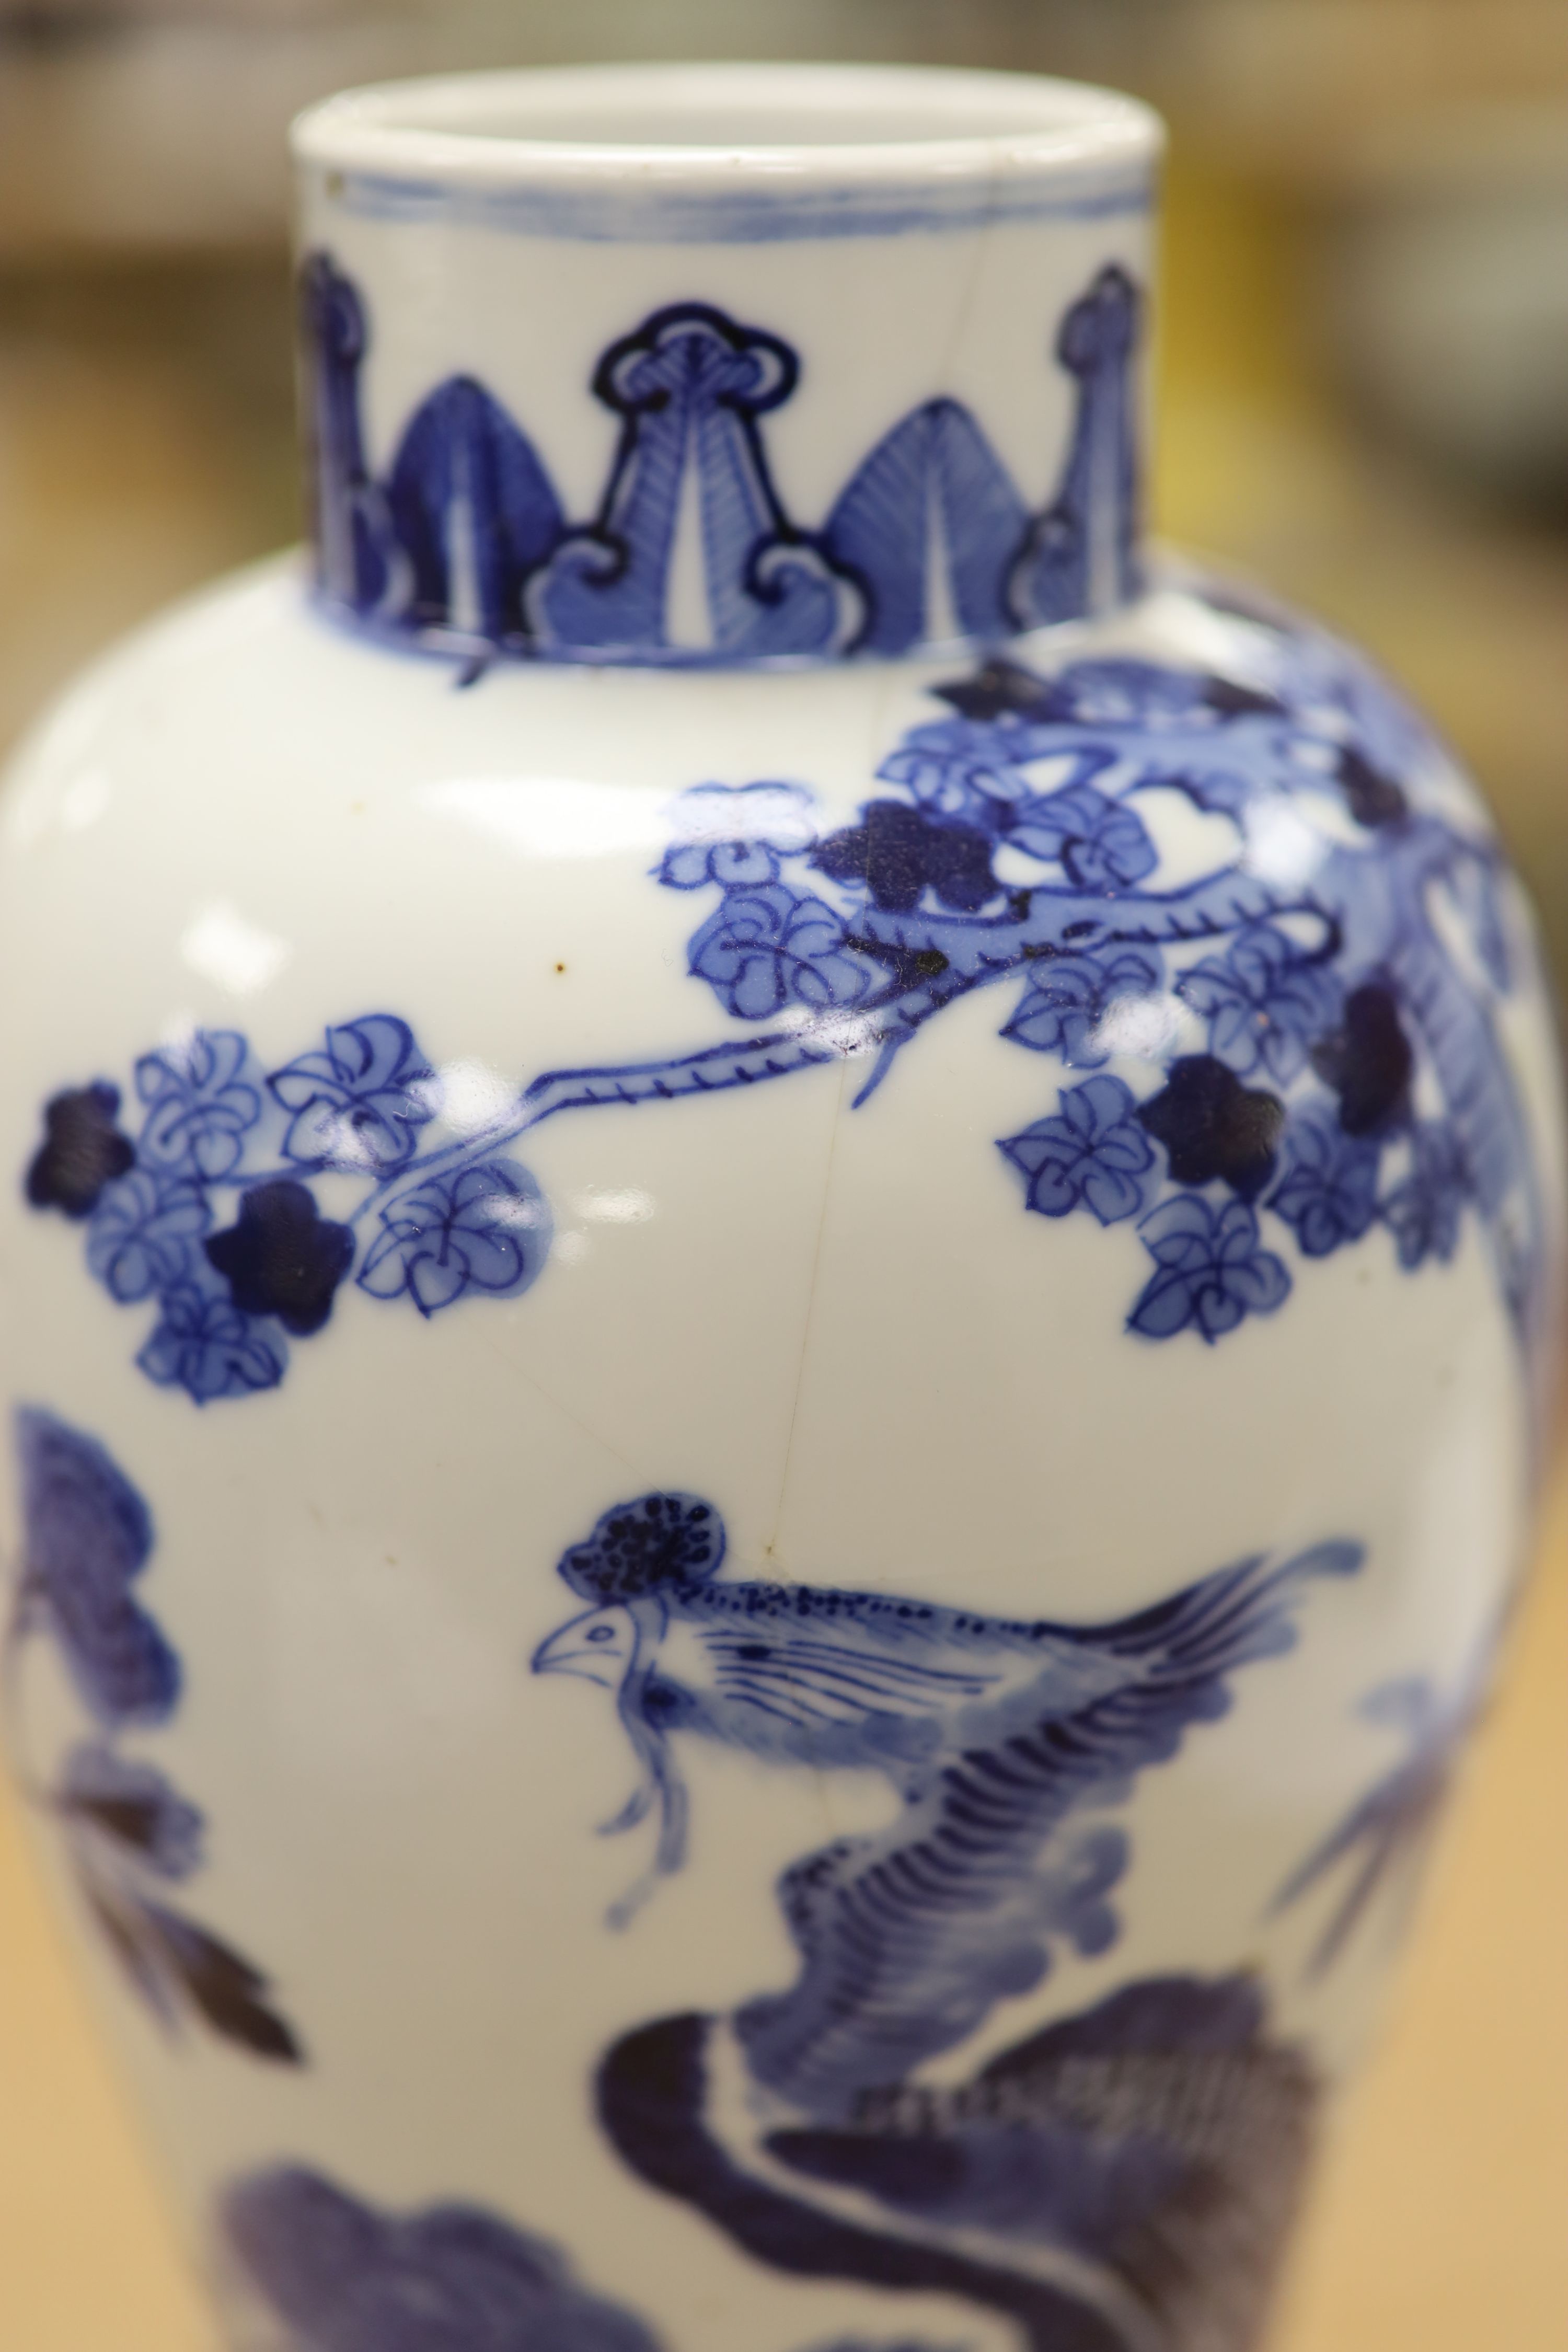 Two 19th century Chinese blue and white vases, decorated with phoenix, tallest 28cm (a.f)